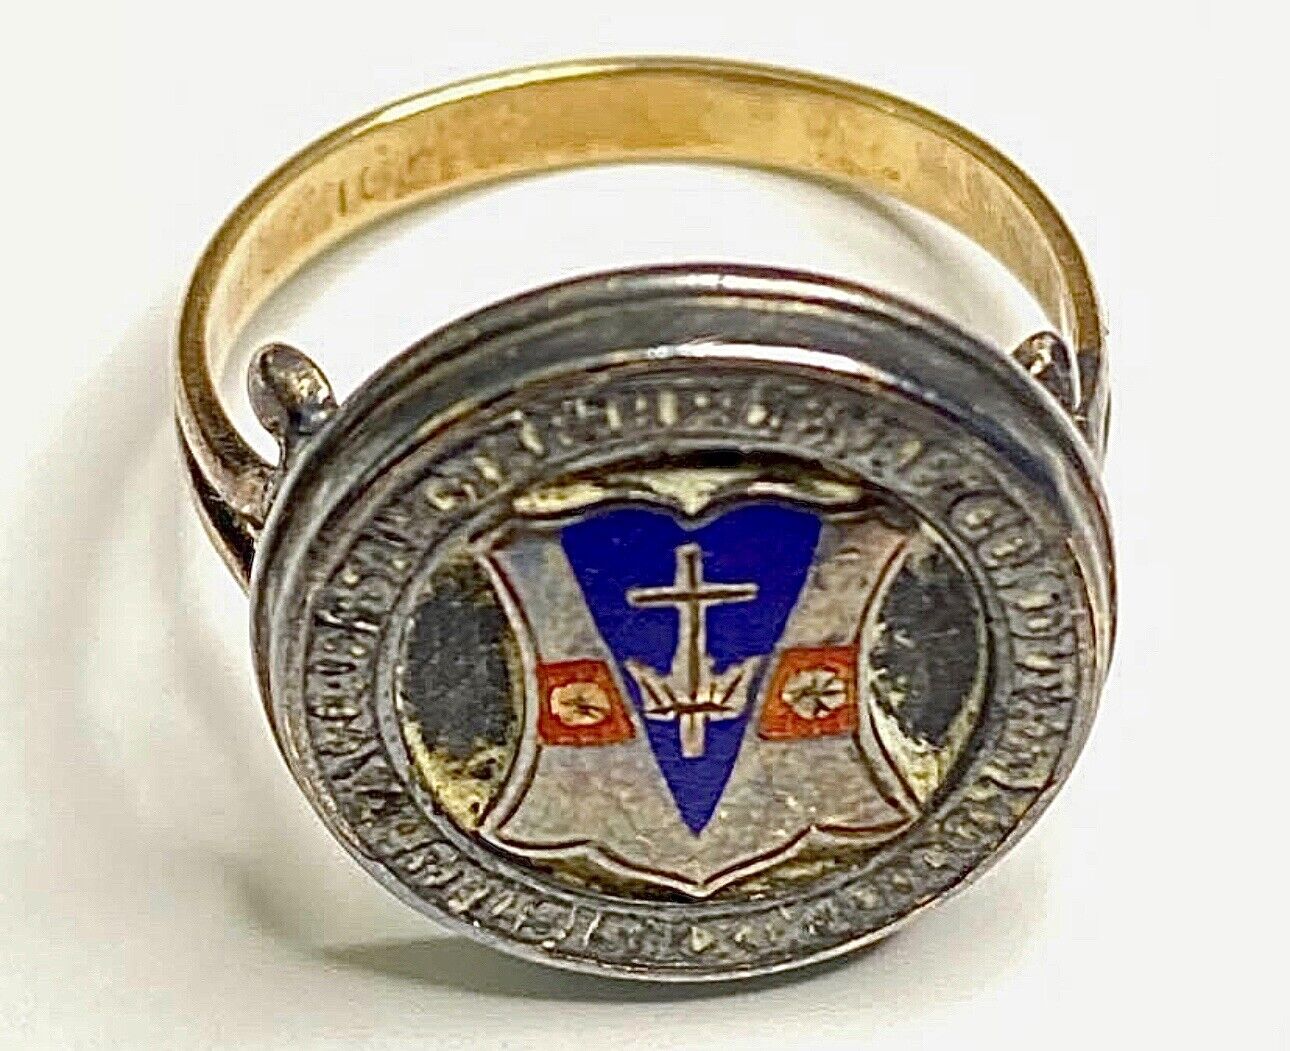 Antique 1800s 10Kt Gold Knights of Columbus Signet Ring with Enamel Detail - Rare Vintage Collectible - TreasuTiques